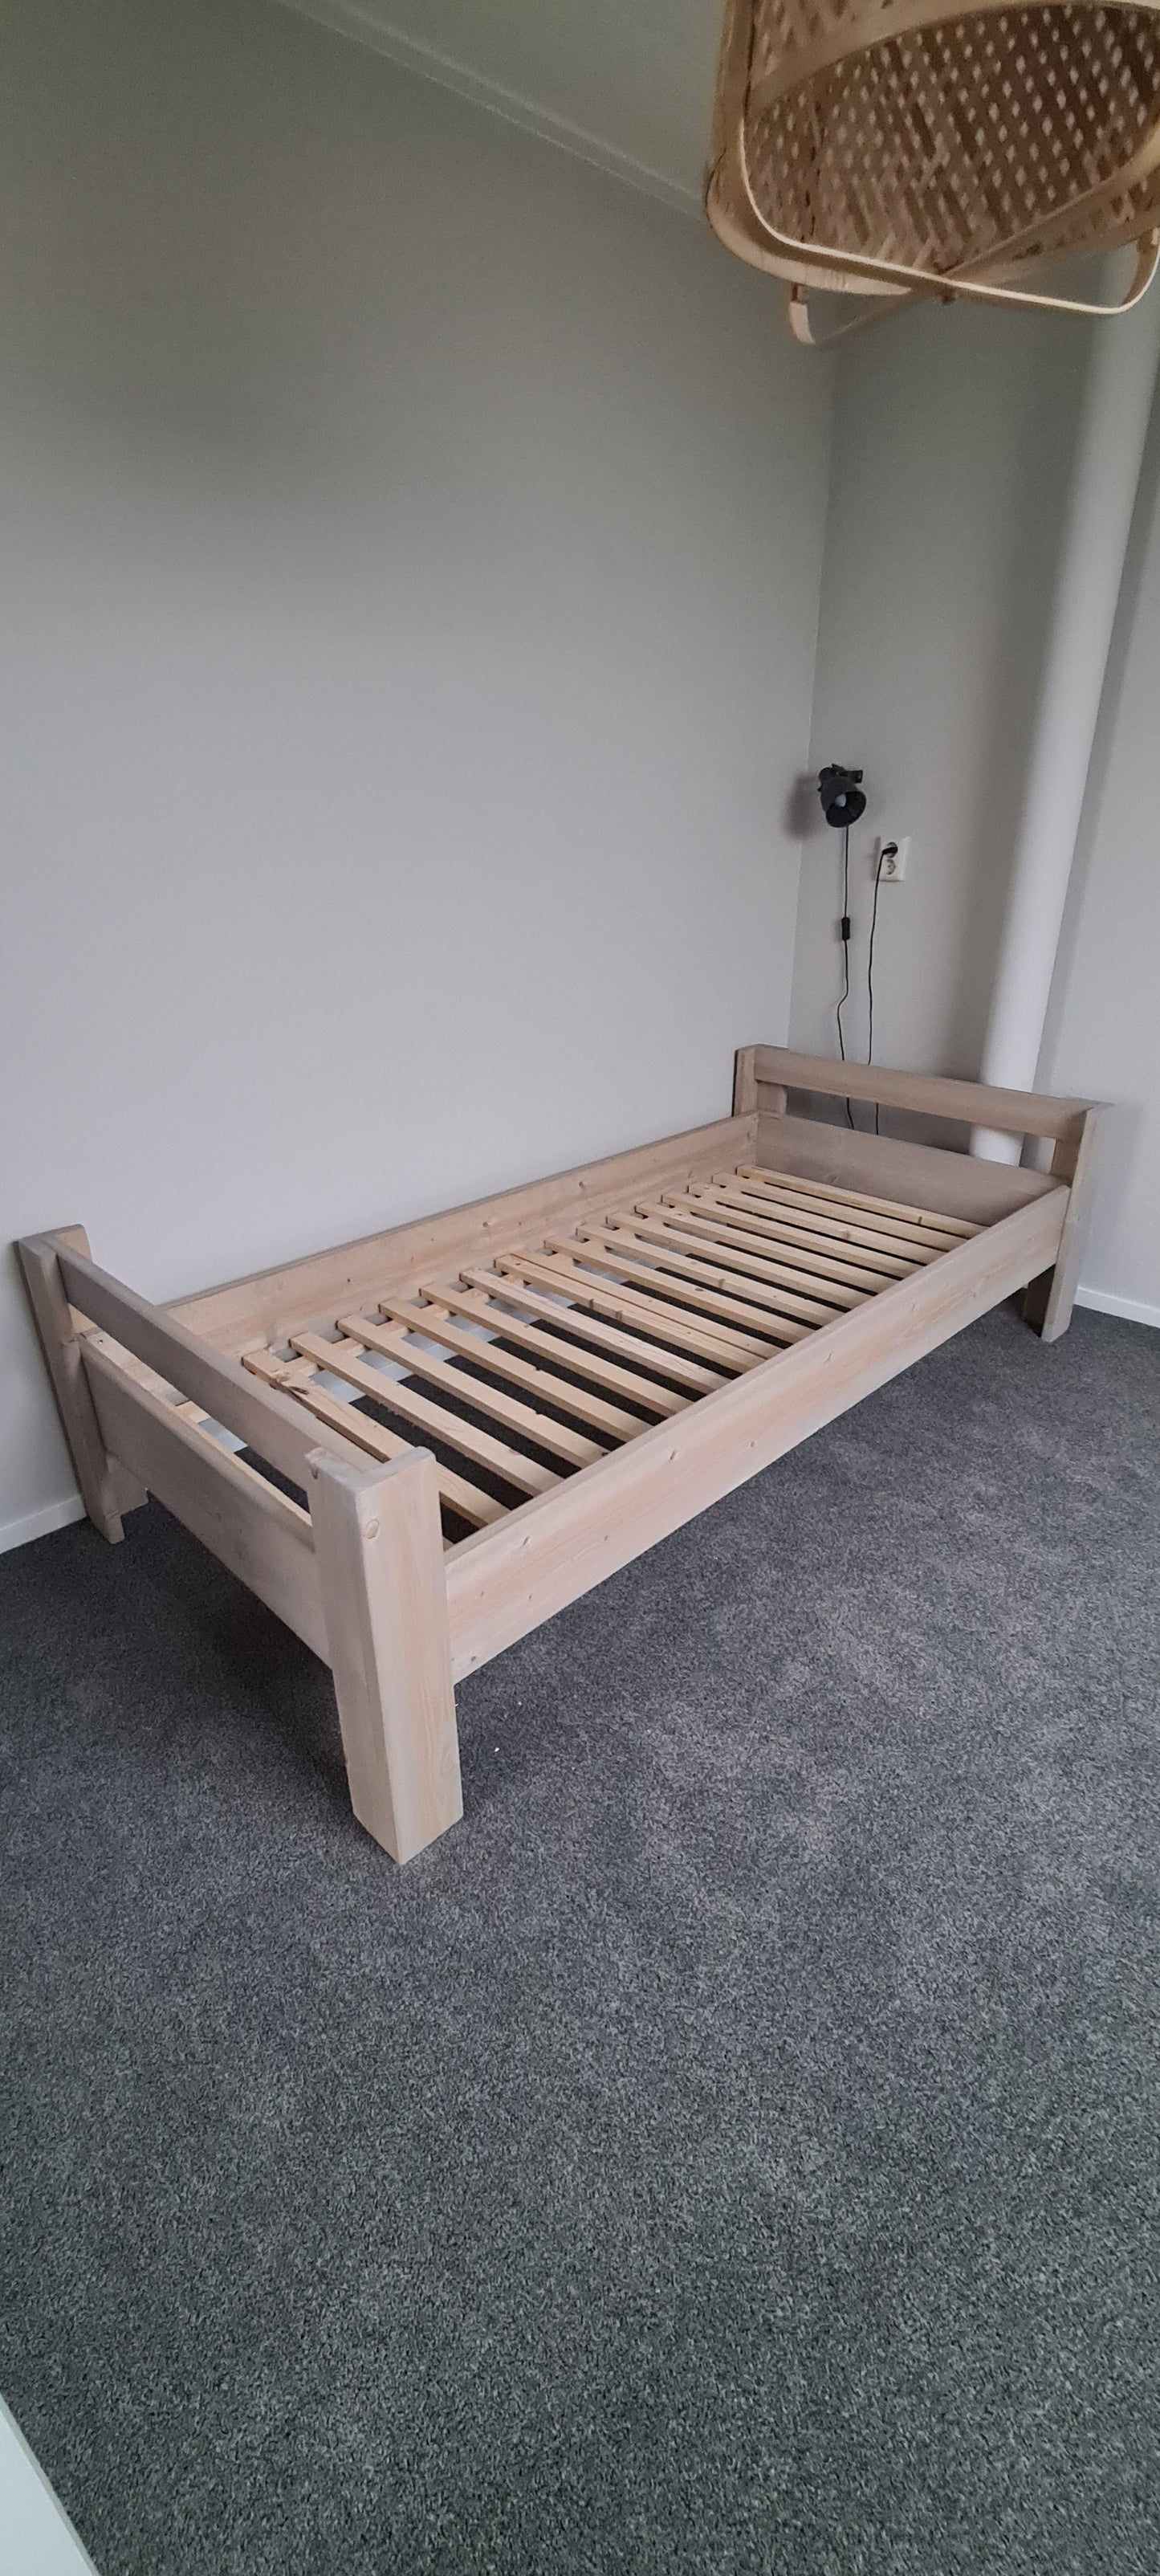 1 pers. bed luxe